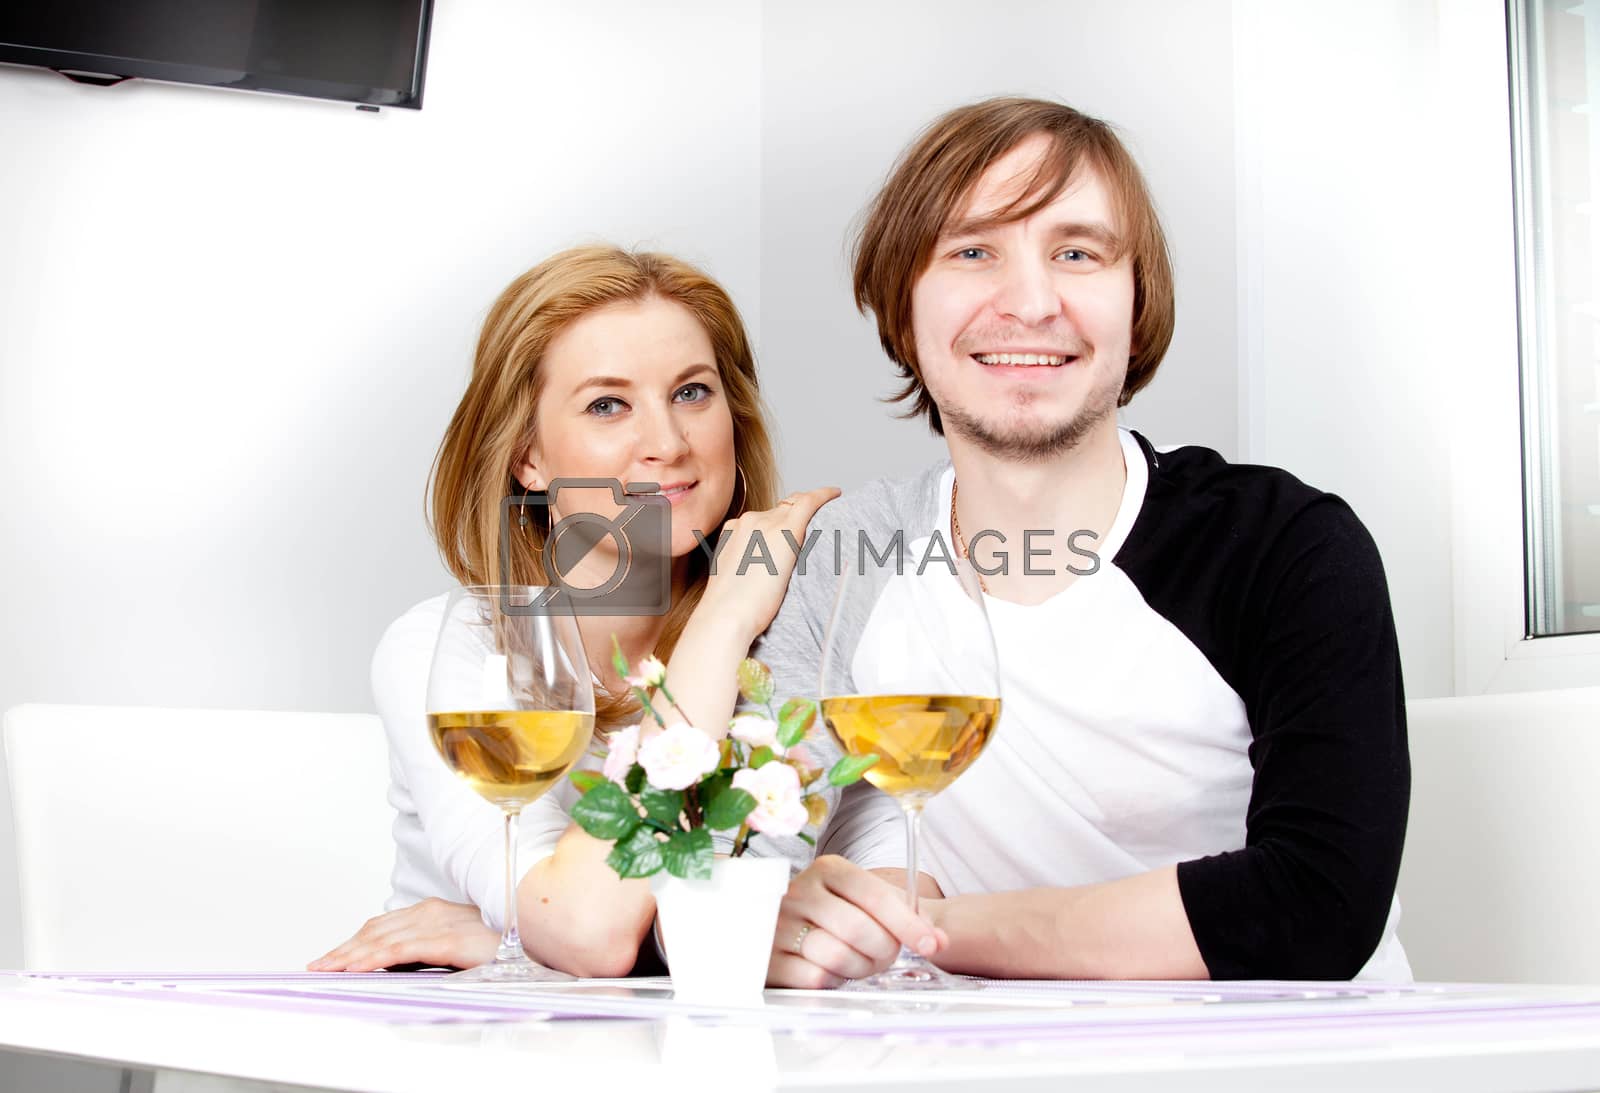 Royalty free image of young woman and her husband by Astroid